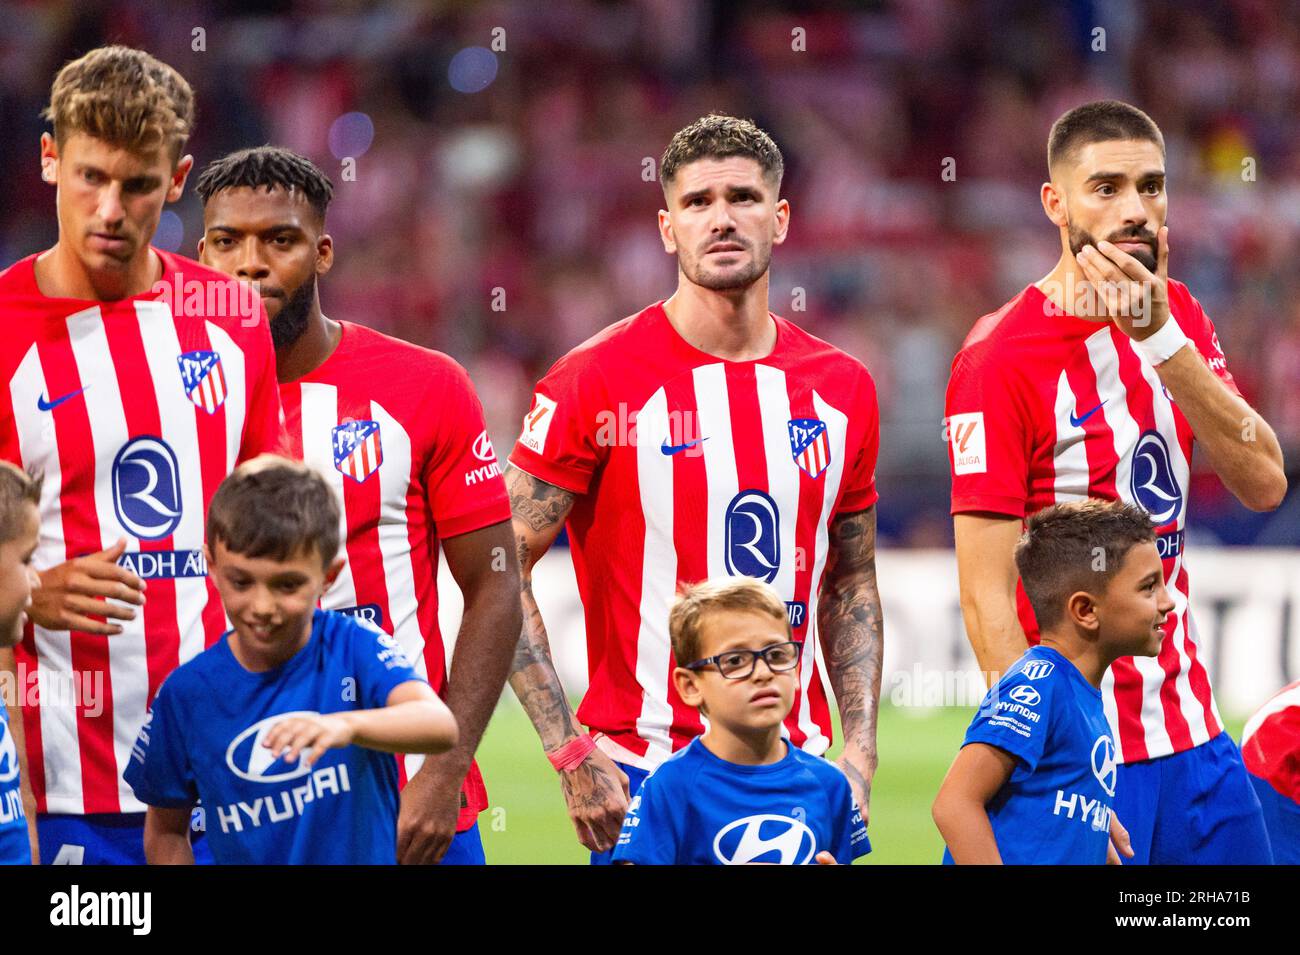 LaLiga Santander - Atletico Madrid: The 30 most promising players in  Atletico's academy at the start of the decade: Where are they now?